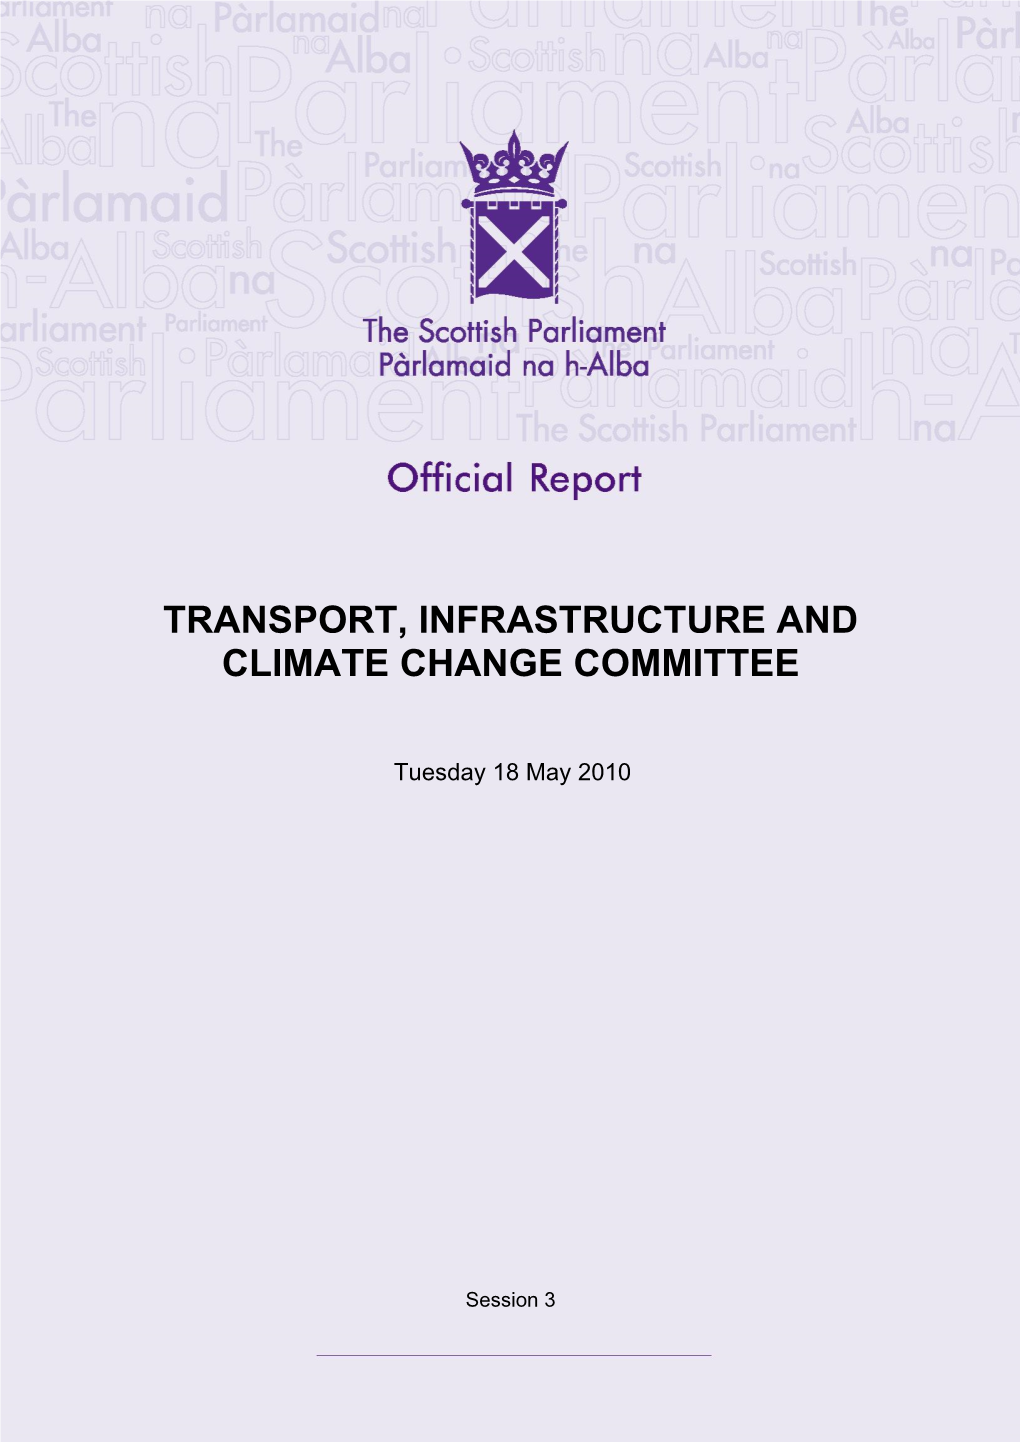 Transport, Infrastructure and Climate Change Committee